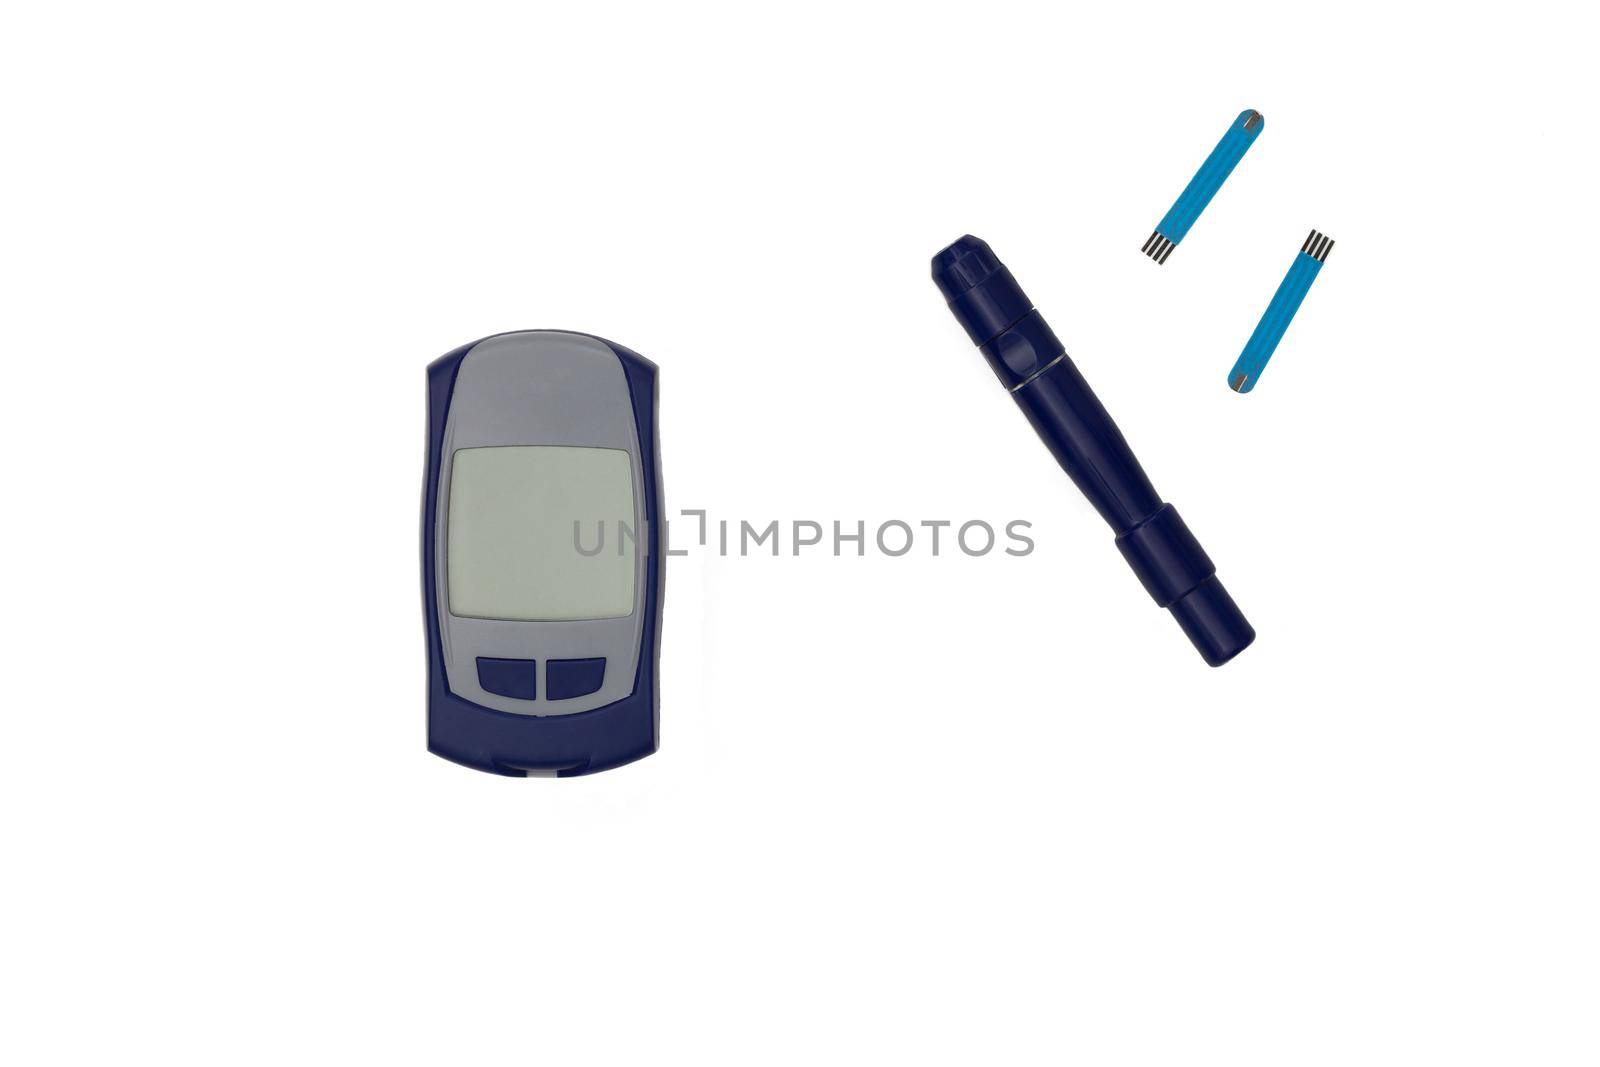 Top view of isolated glucometer lancet and test strips on white background